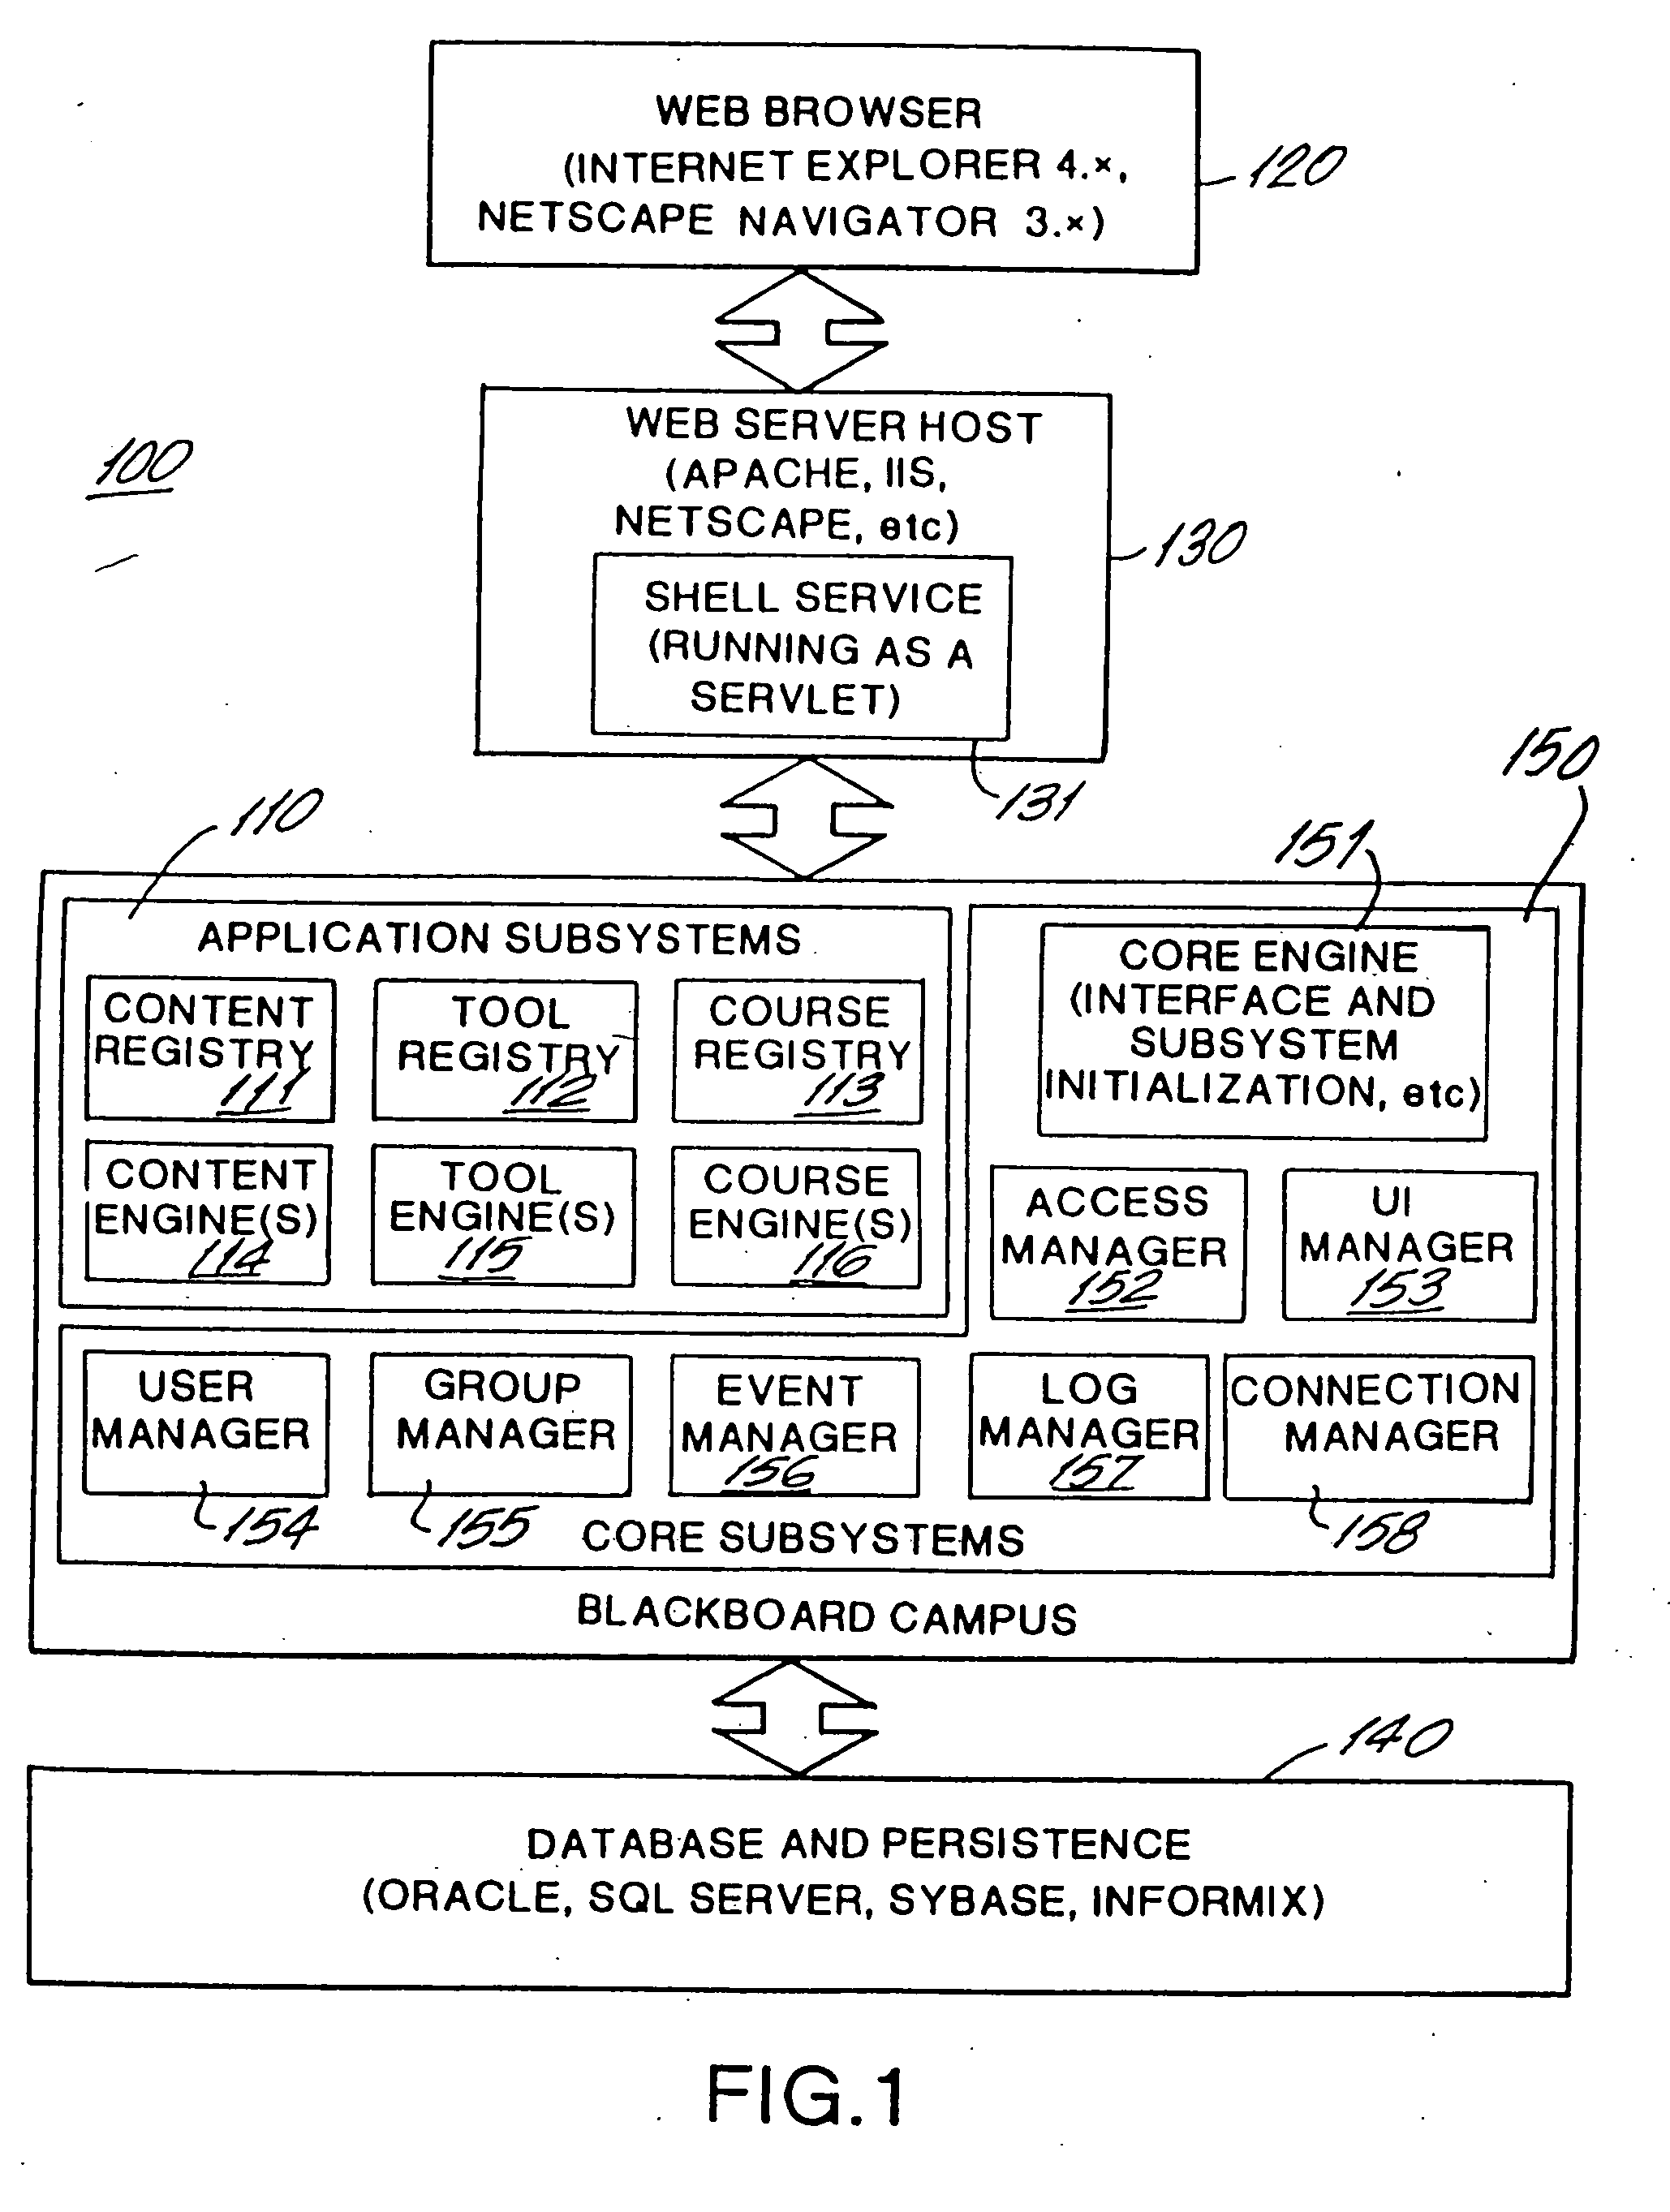 Internet-based education support system and methods